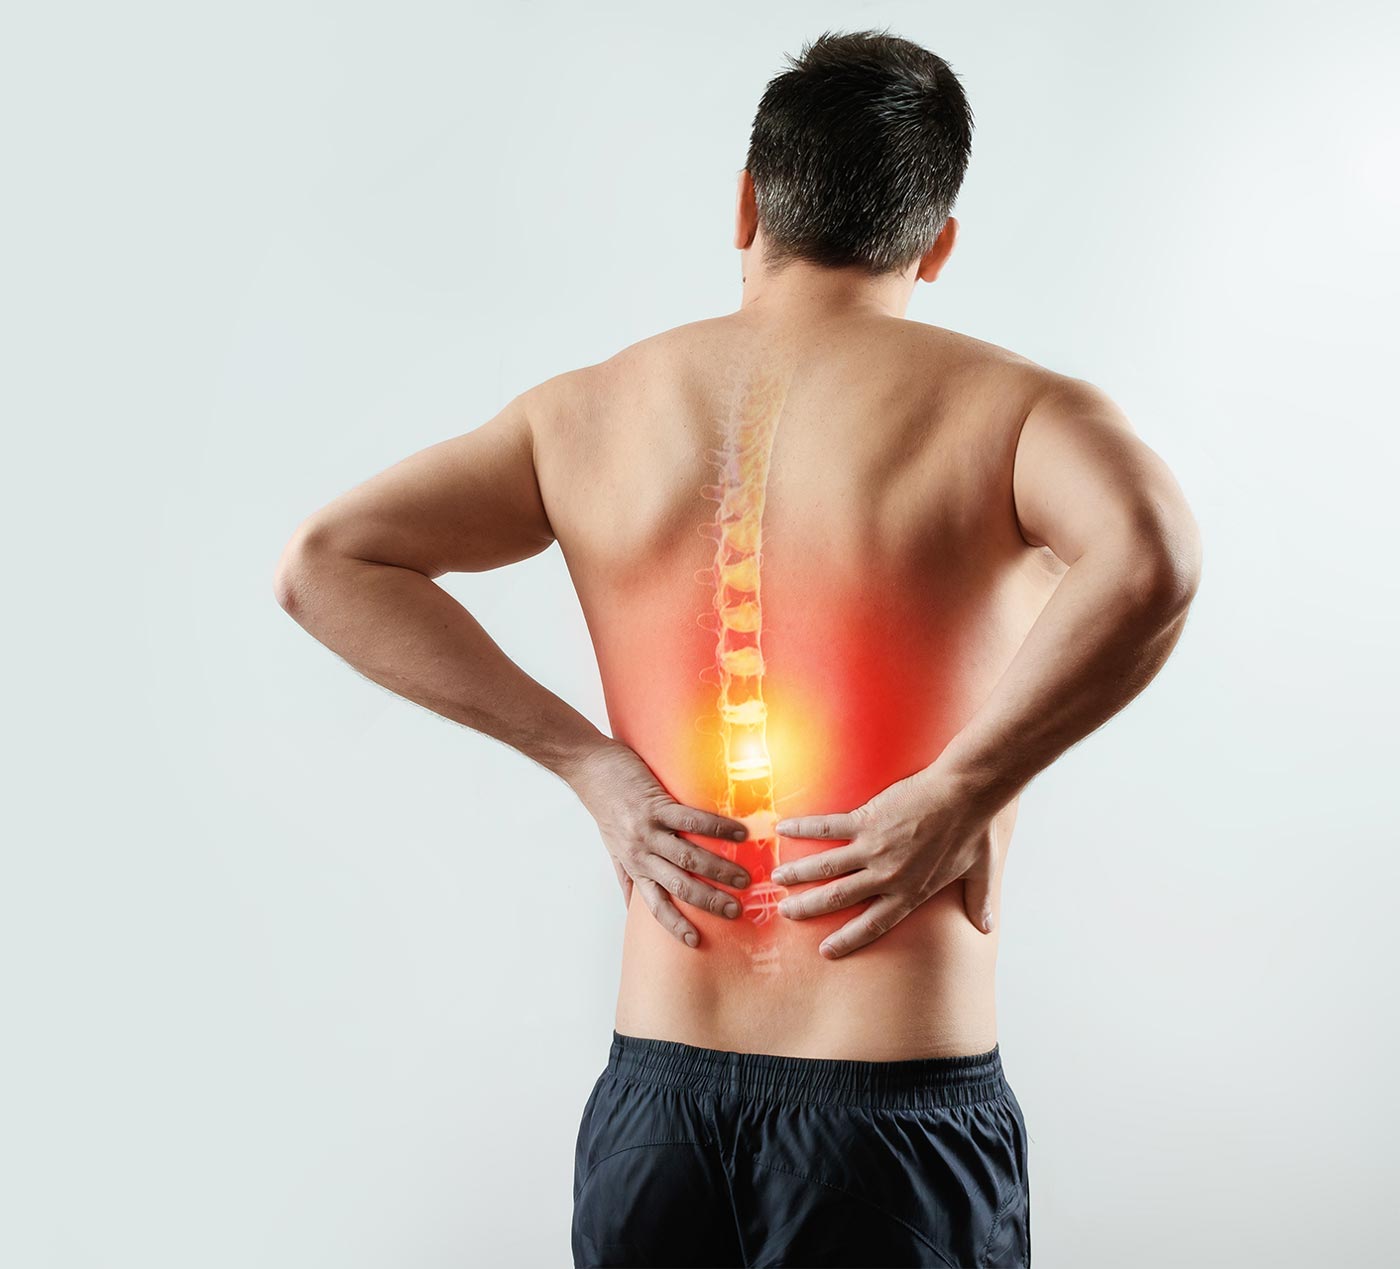 Rear view, the man holds his hands behind his back, pain in the back, pain in the spine, highlighted in red. Light background. The concept of medicine, massage, physiotherapy, health.